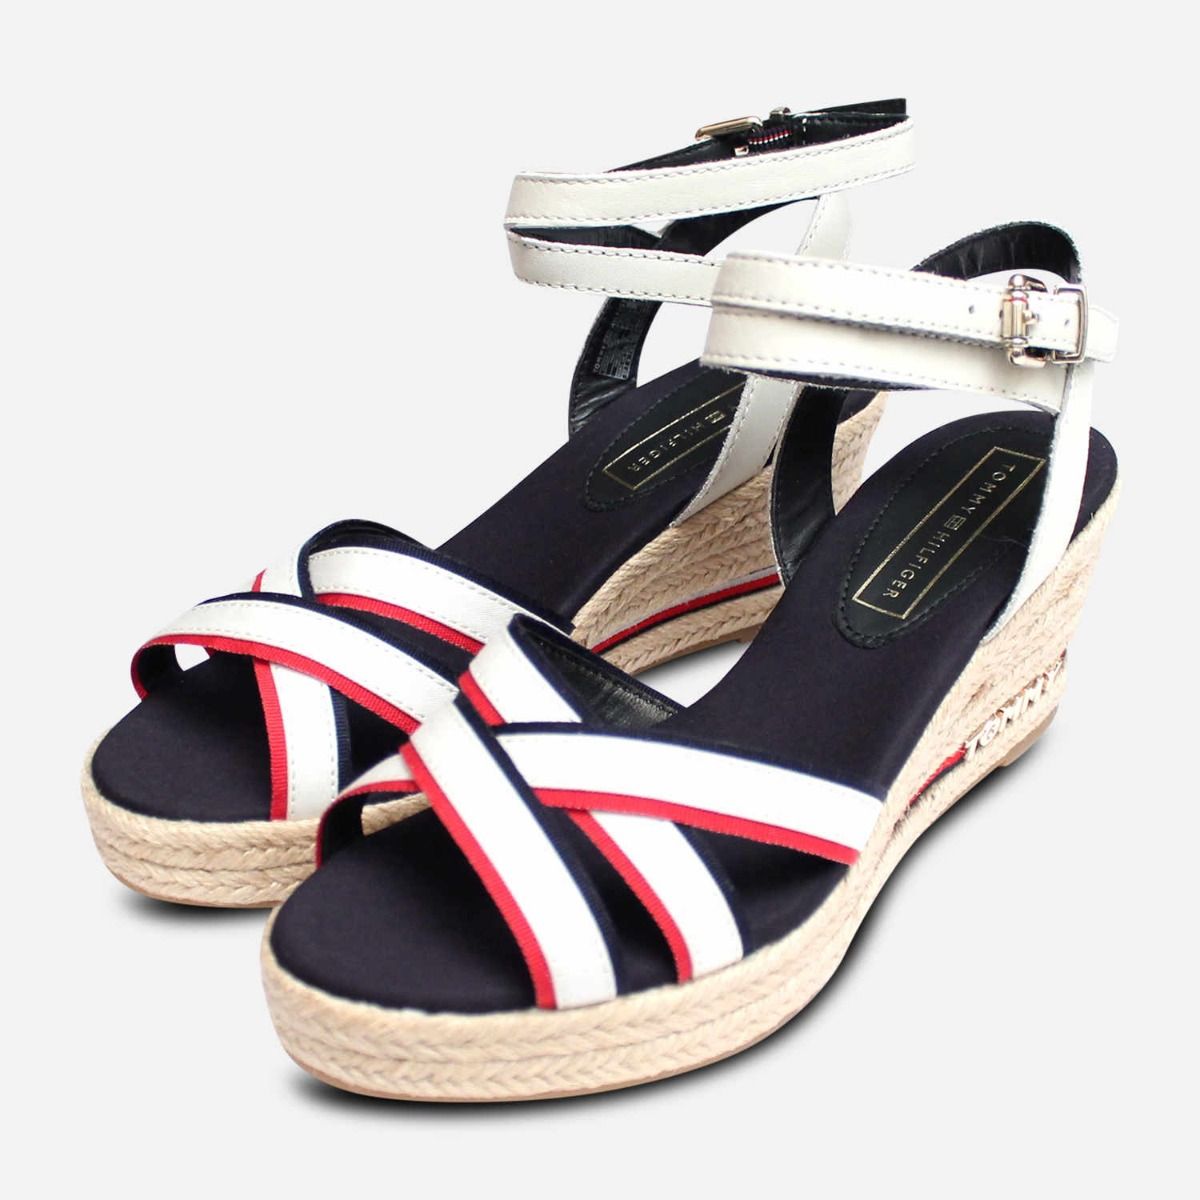 ESIE | High Heel Sporty Nappa Leather Wedge Sandal With Hand Braided Straps